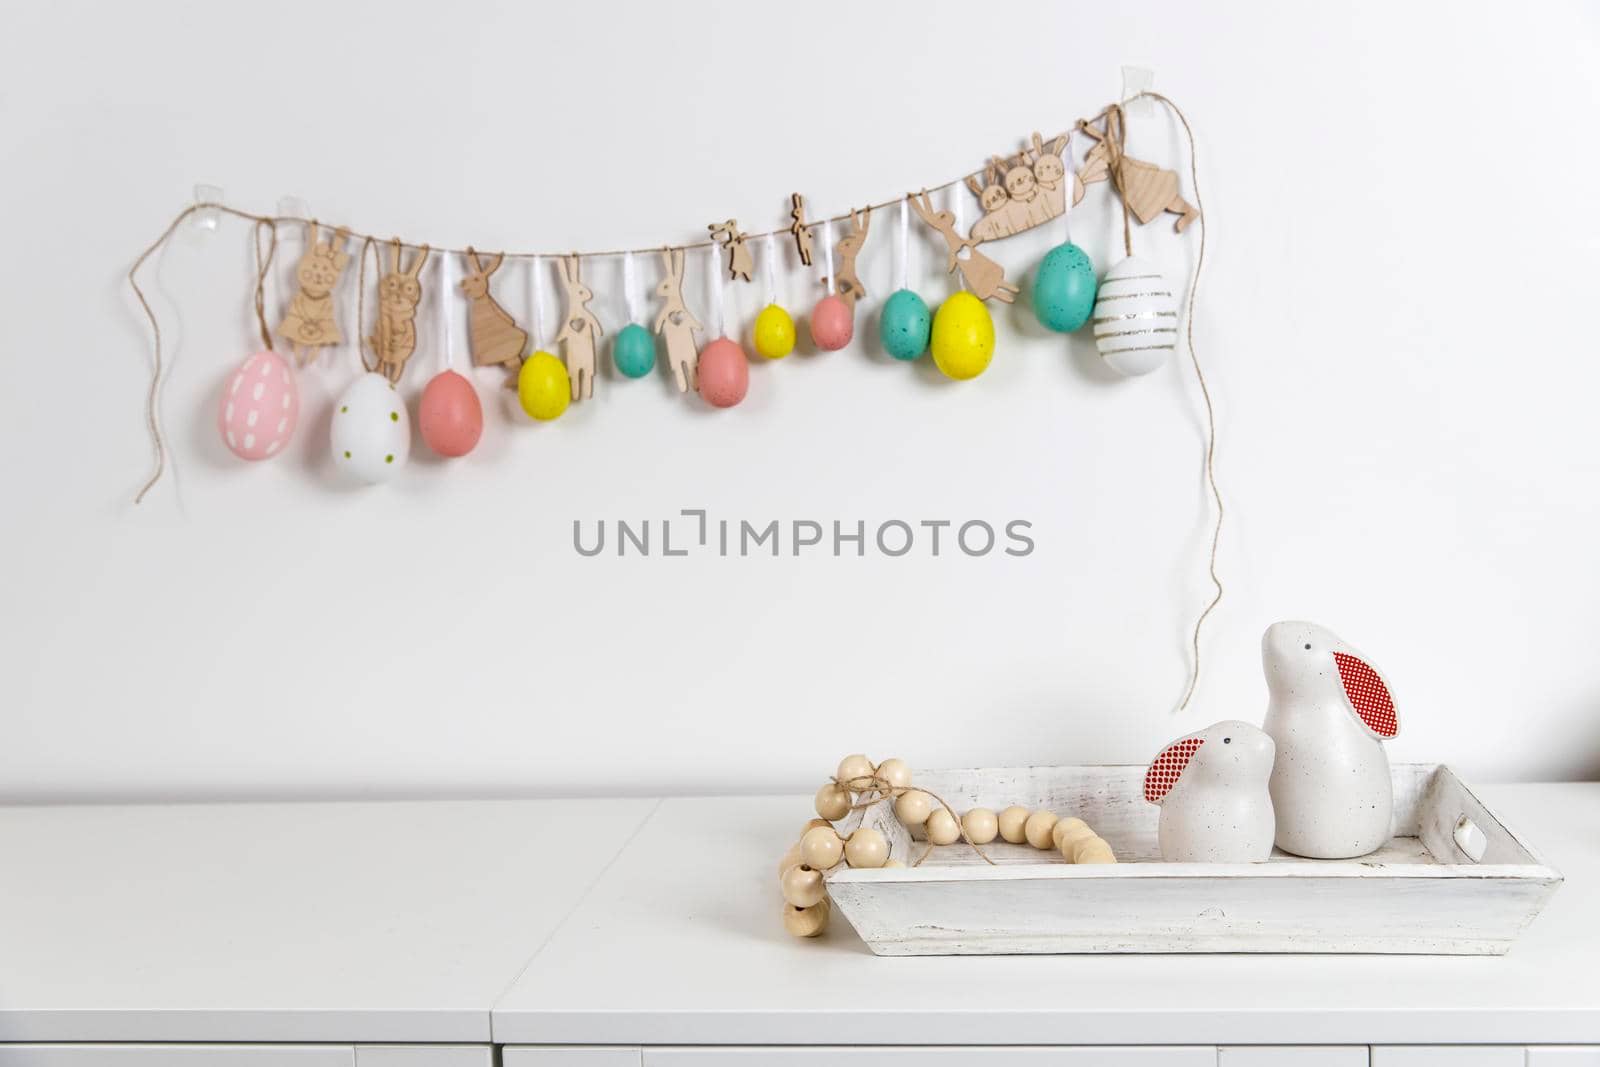 Fragment of the interior. Decorated children's room for Easter. A garland of plastic eggs on the wall. Ceramic rabbits and wooden cubes on the table. Place for your text. Easter card.